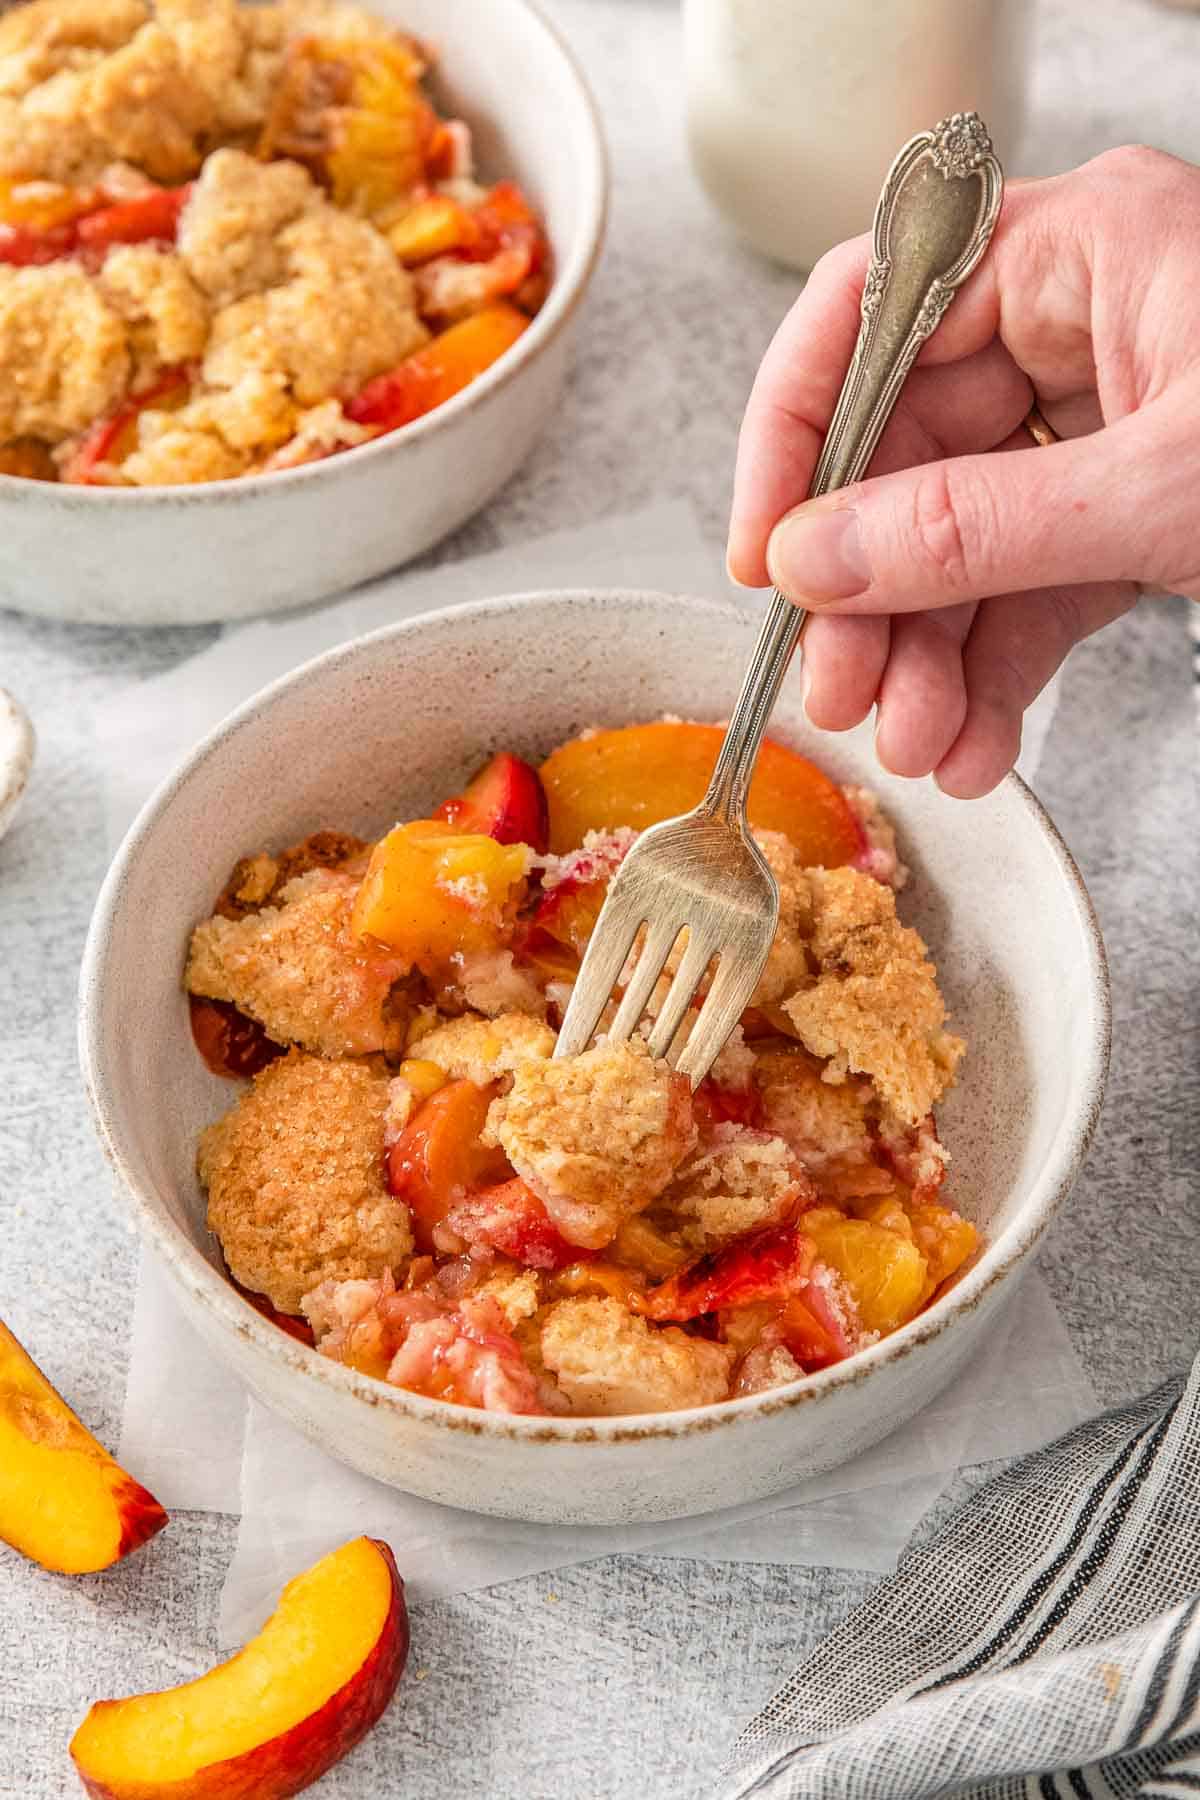 Peach cobbler in a white bowl with hand holding fork in dish.